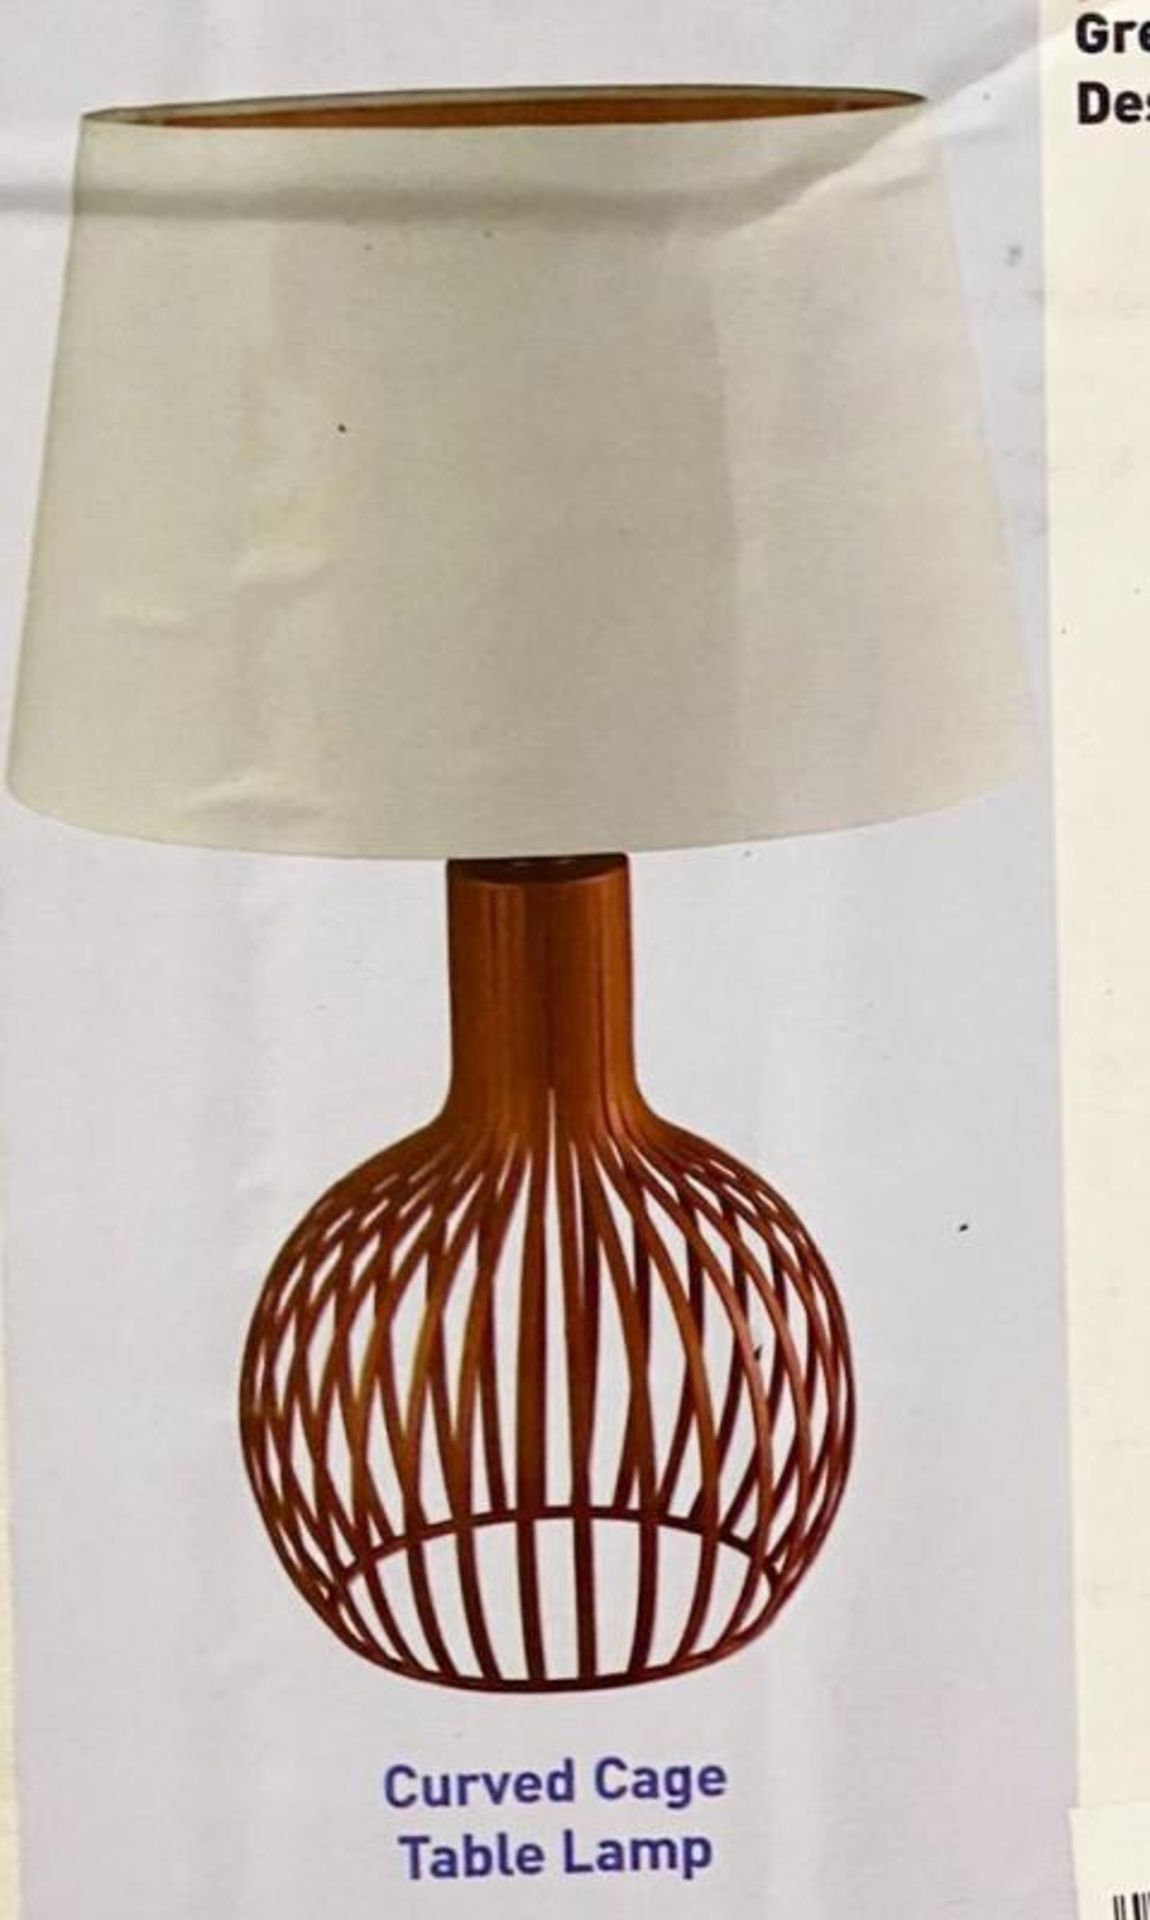 1 x Searchlight Curved Cage Table Lamp in a red finish with a steel base- Ref: 7381RE - New And Boxe